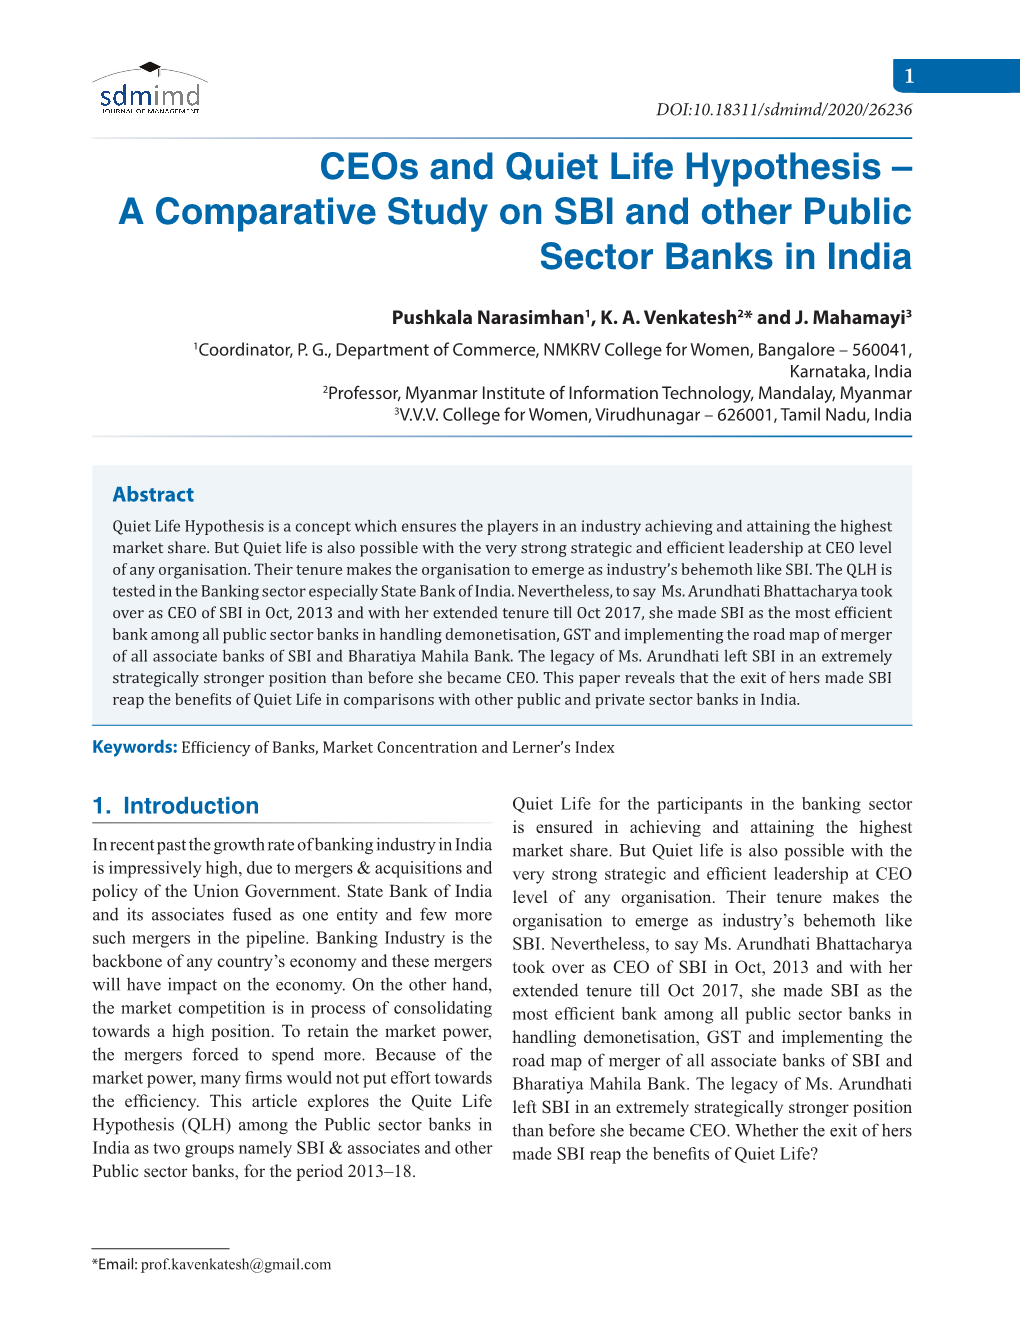 A Comparative Study on SBI and Other Public Sector Banks in India